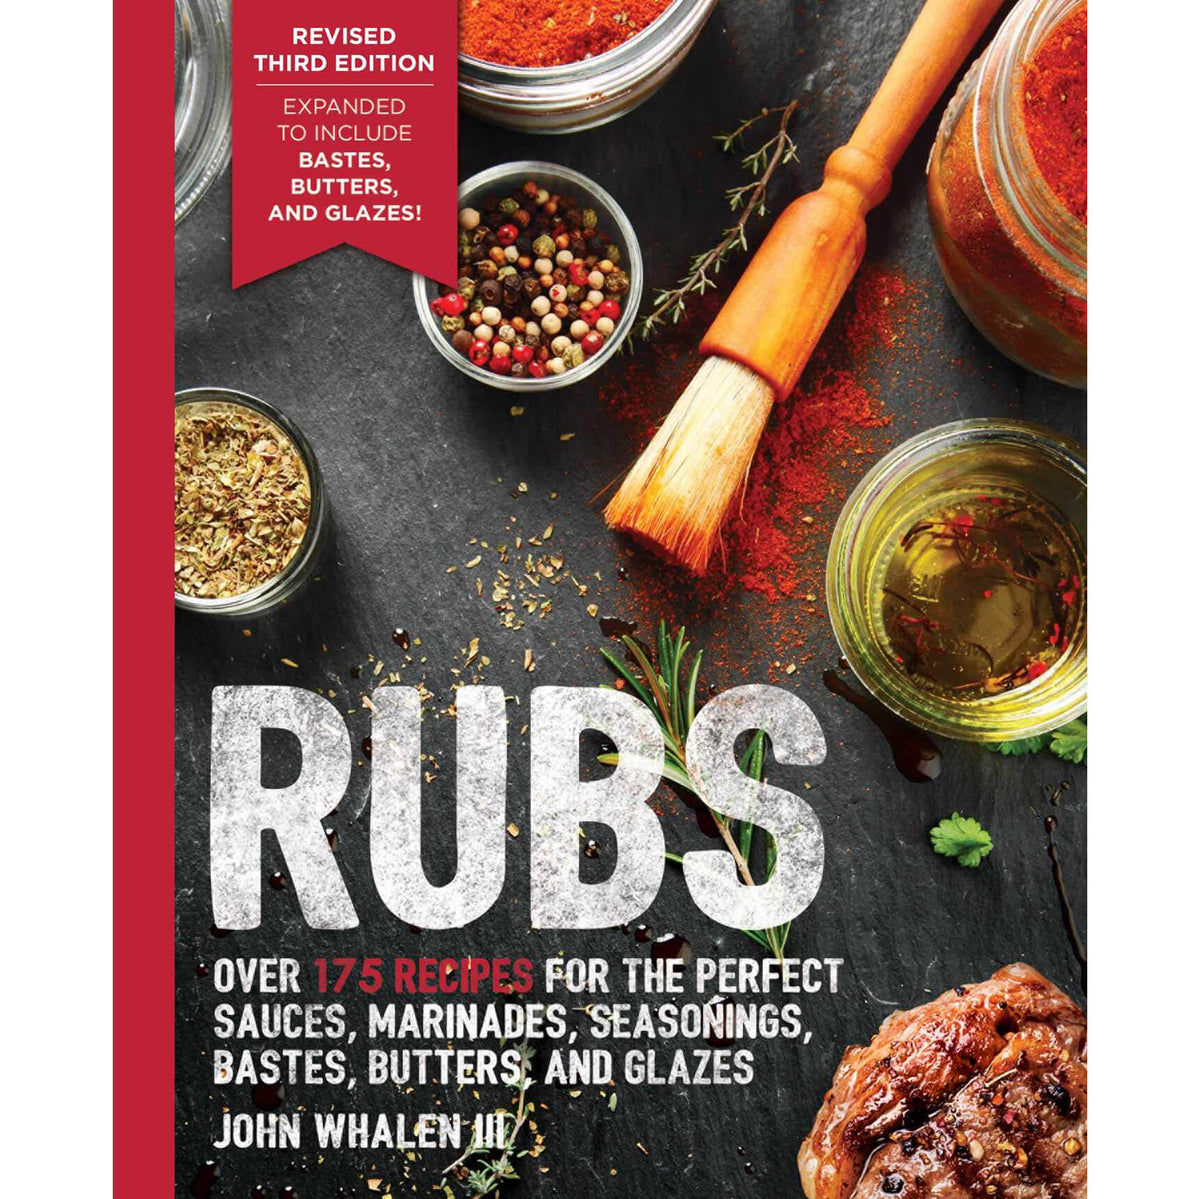 Rubs: Over 150 Recipes For The Perfect Sauces, Marinades, Seasonings, Bastes, Butters And Glazes front cover.